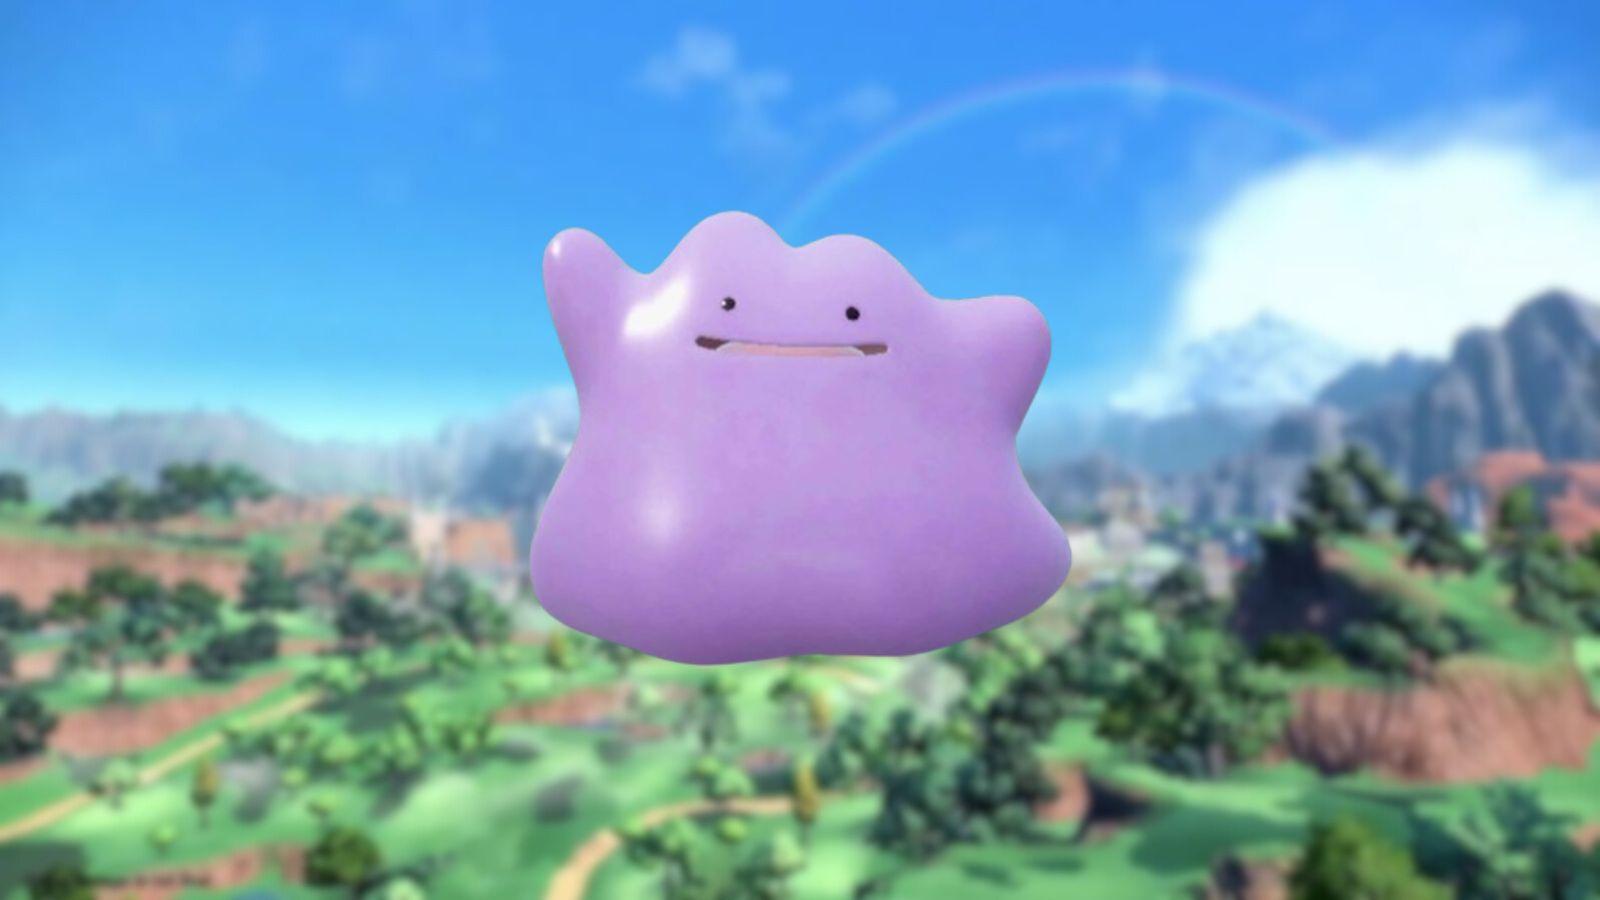 Ditto celebrates as the reason for a new duplication glitch